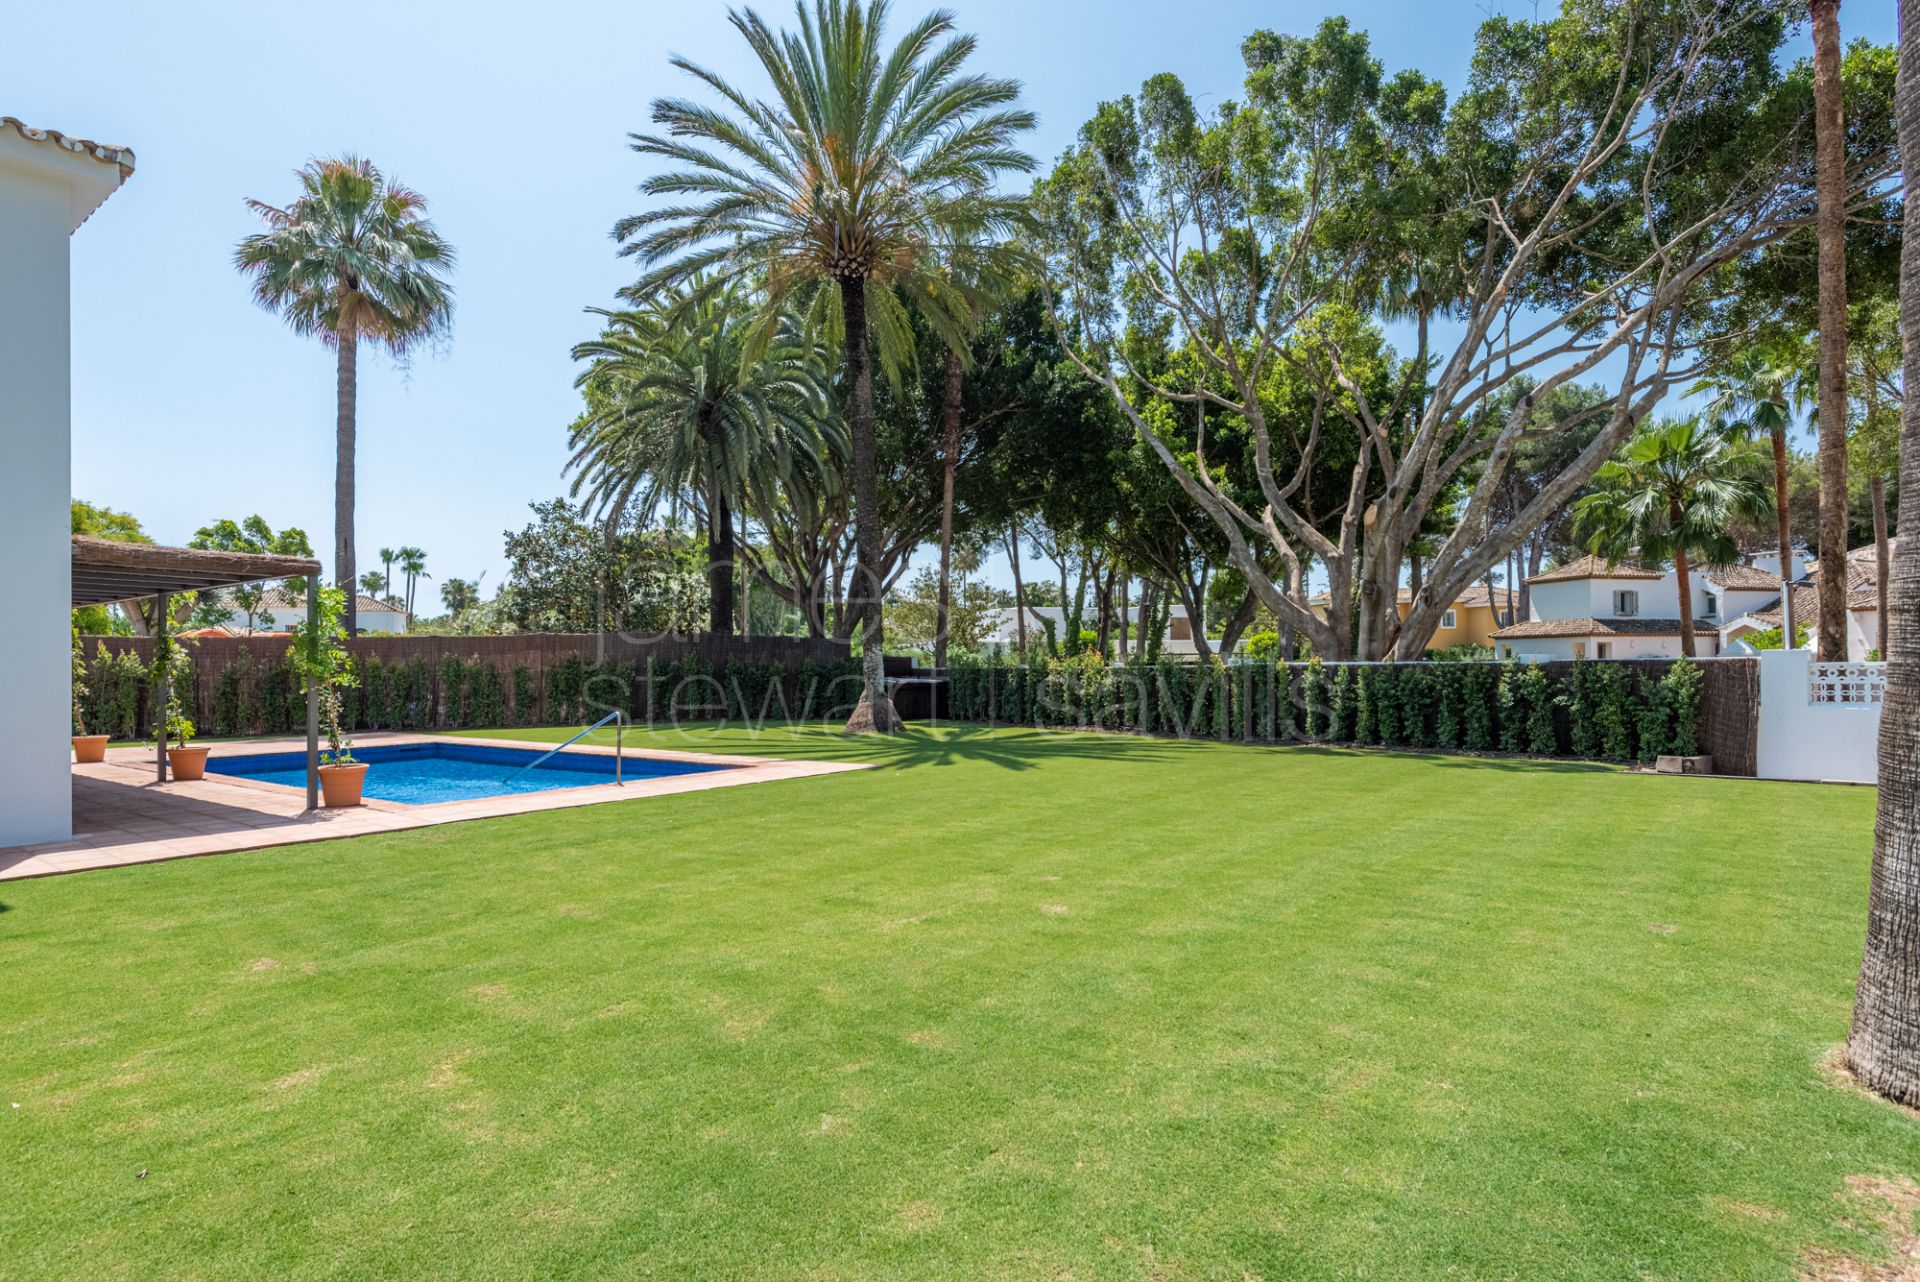 Brand new villa in the heart of the Kings and Queens, Sotogrande